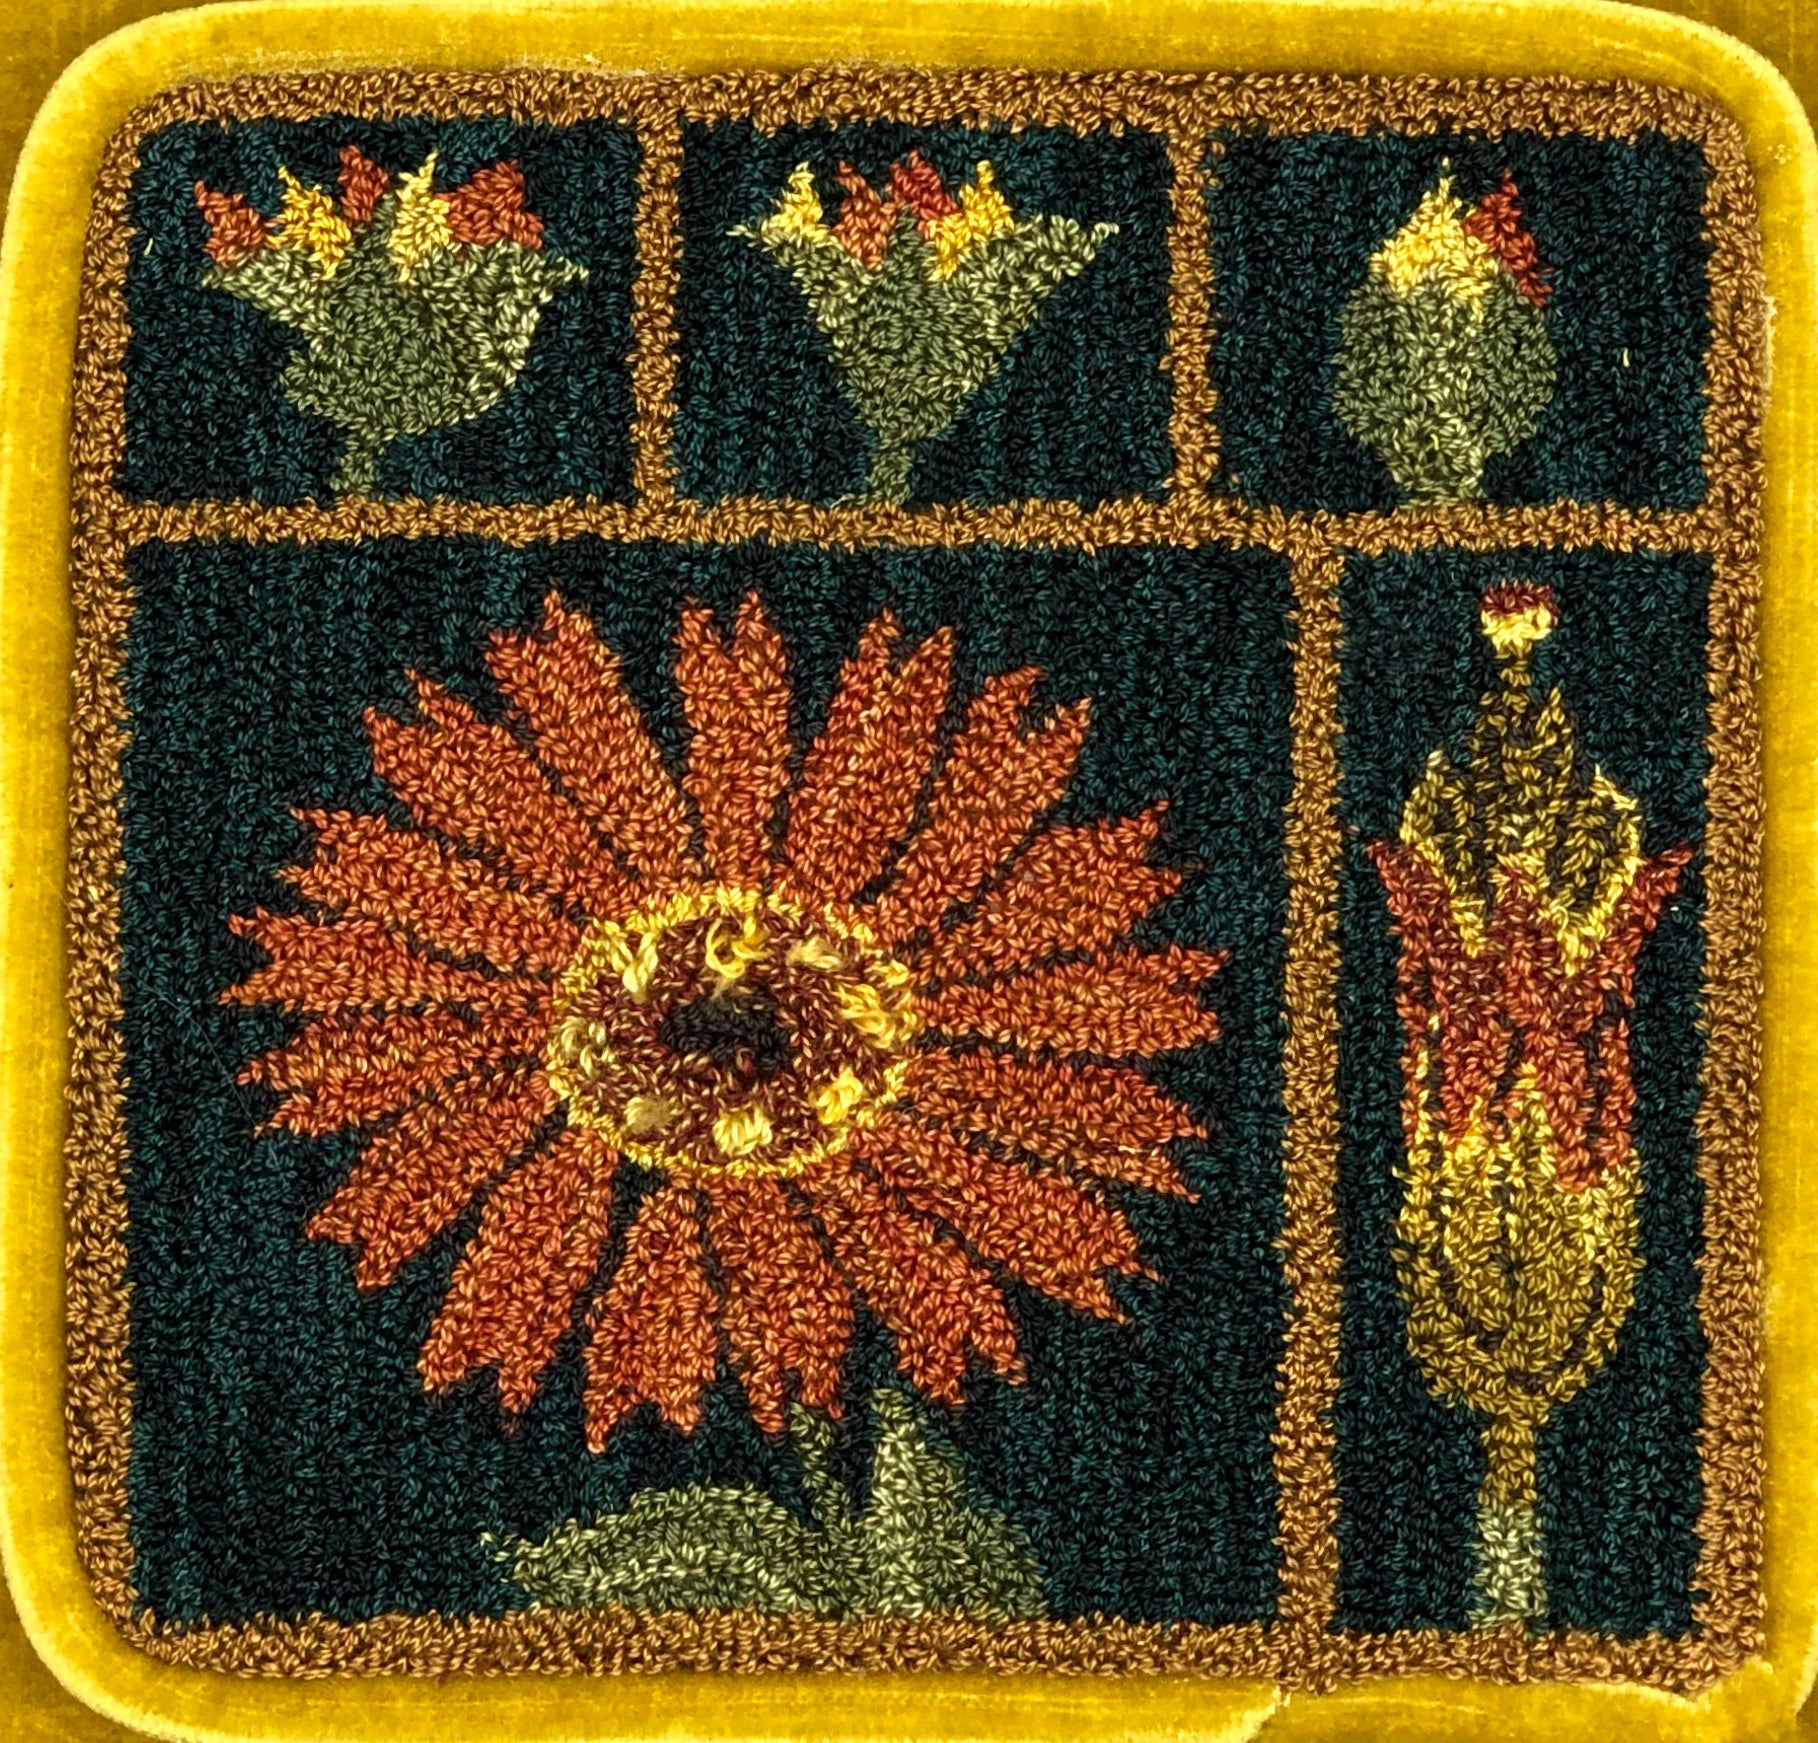 Marigold Paper Rug Hooking or Rug Punching pattern is a beautiful botanical pattern by Orphaned Wool. The Paper Rug Hooking pattern are designed to be enlarged to allow for you to choose a custom size pattern.